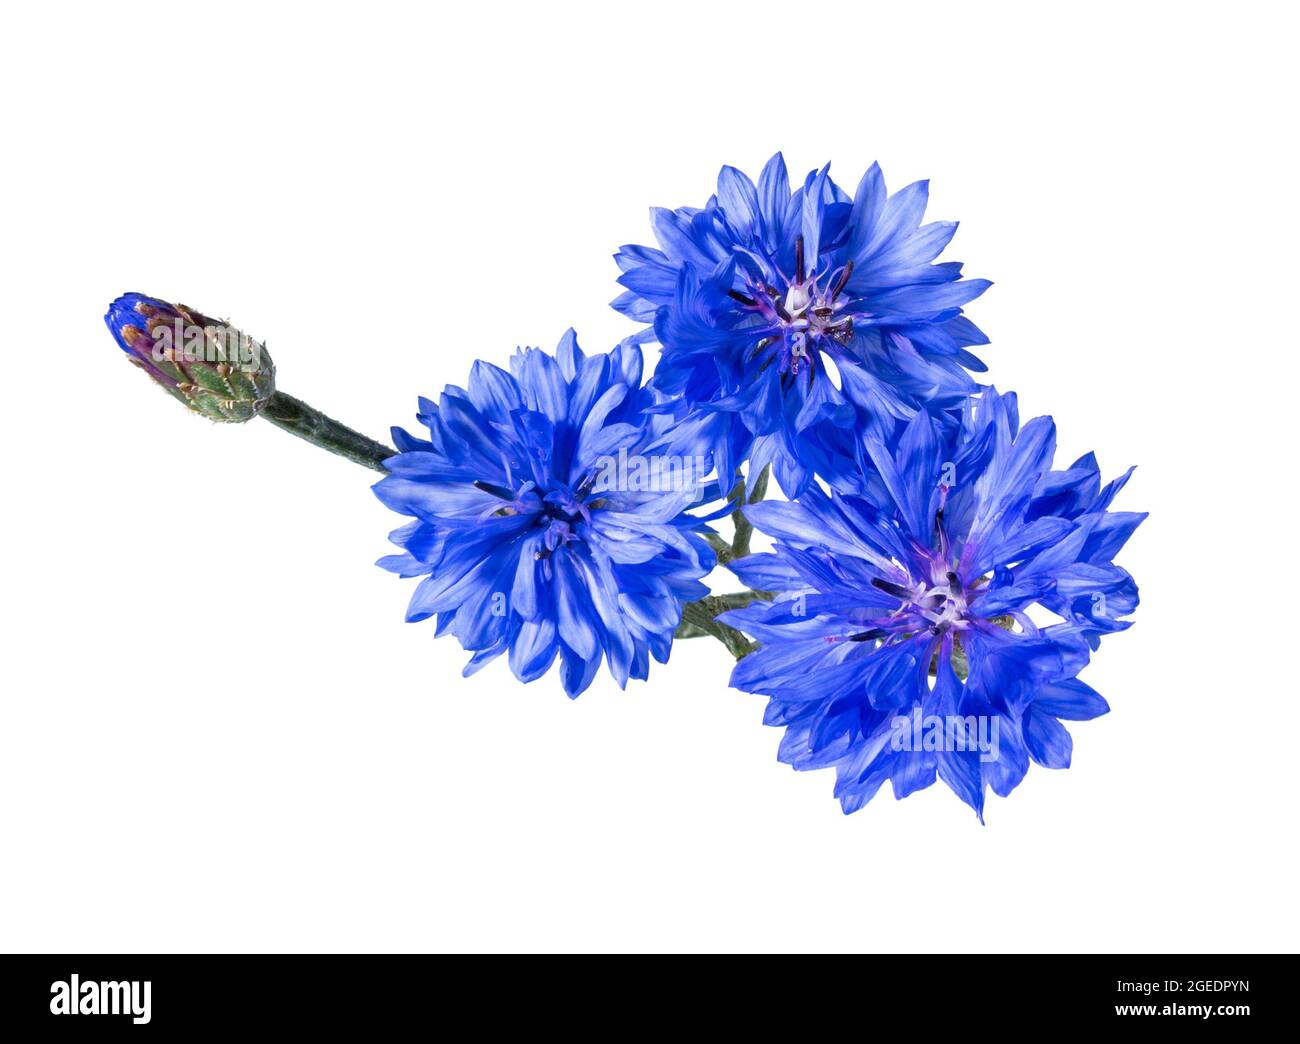 Blue cornflower Cut Out Stock Images & Pictures - Alamy